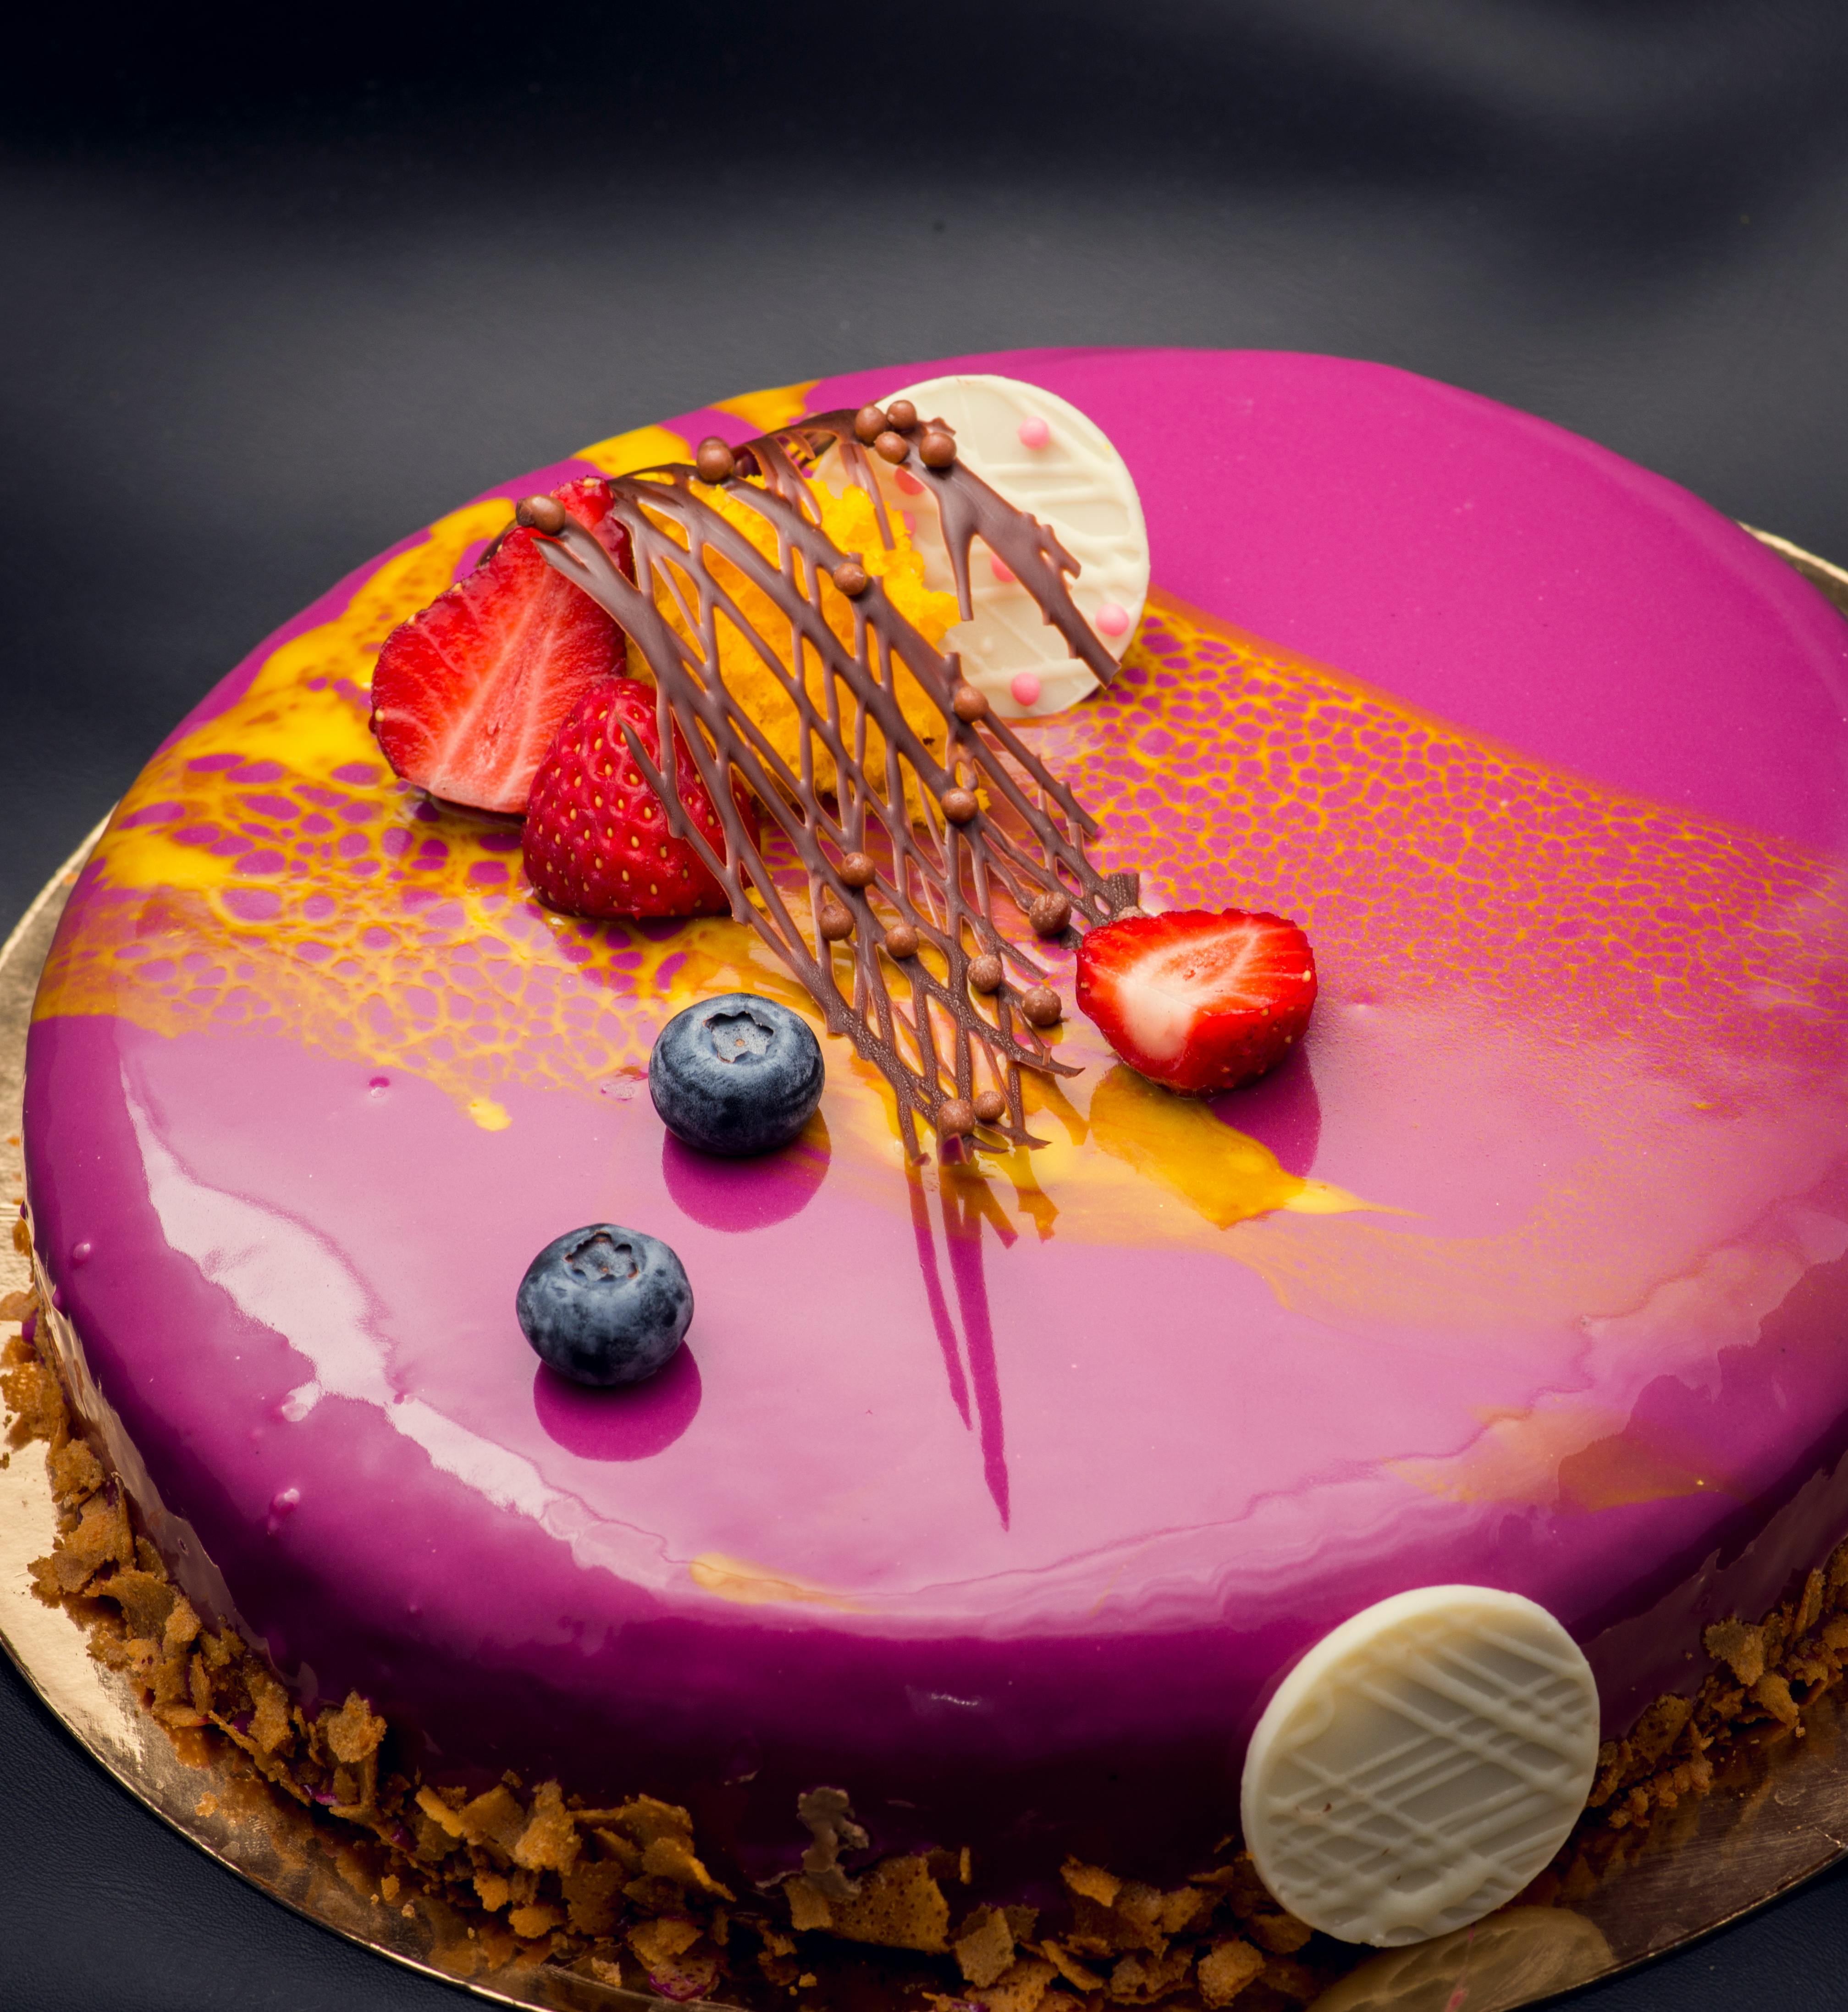 Literally Dazzle Your Date With This Mirror Glaze Cake!